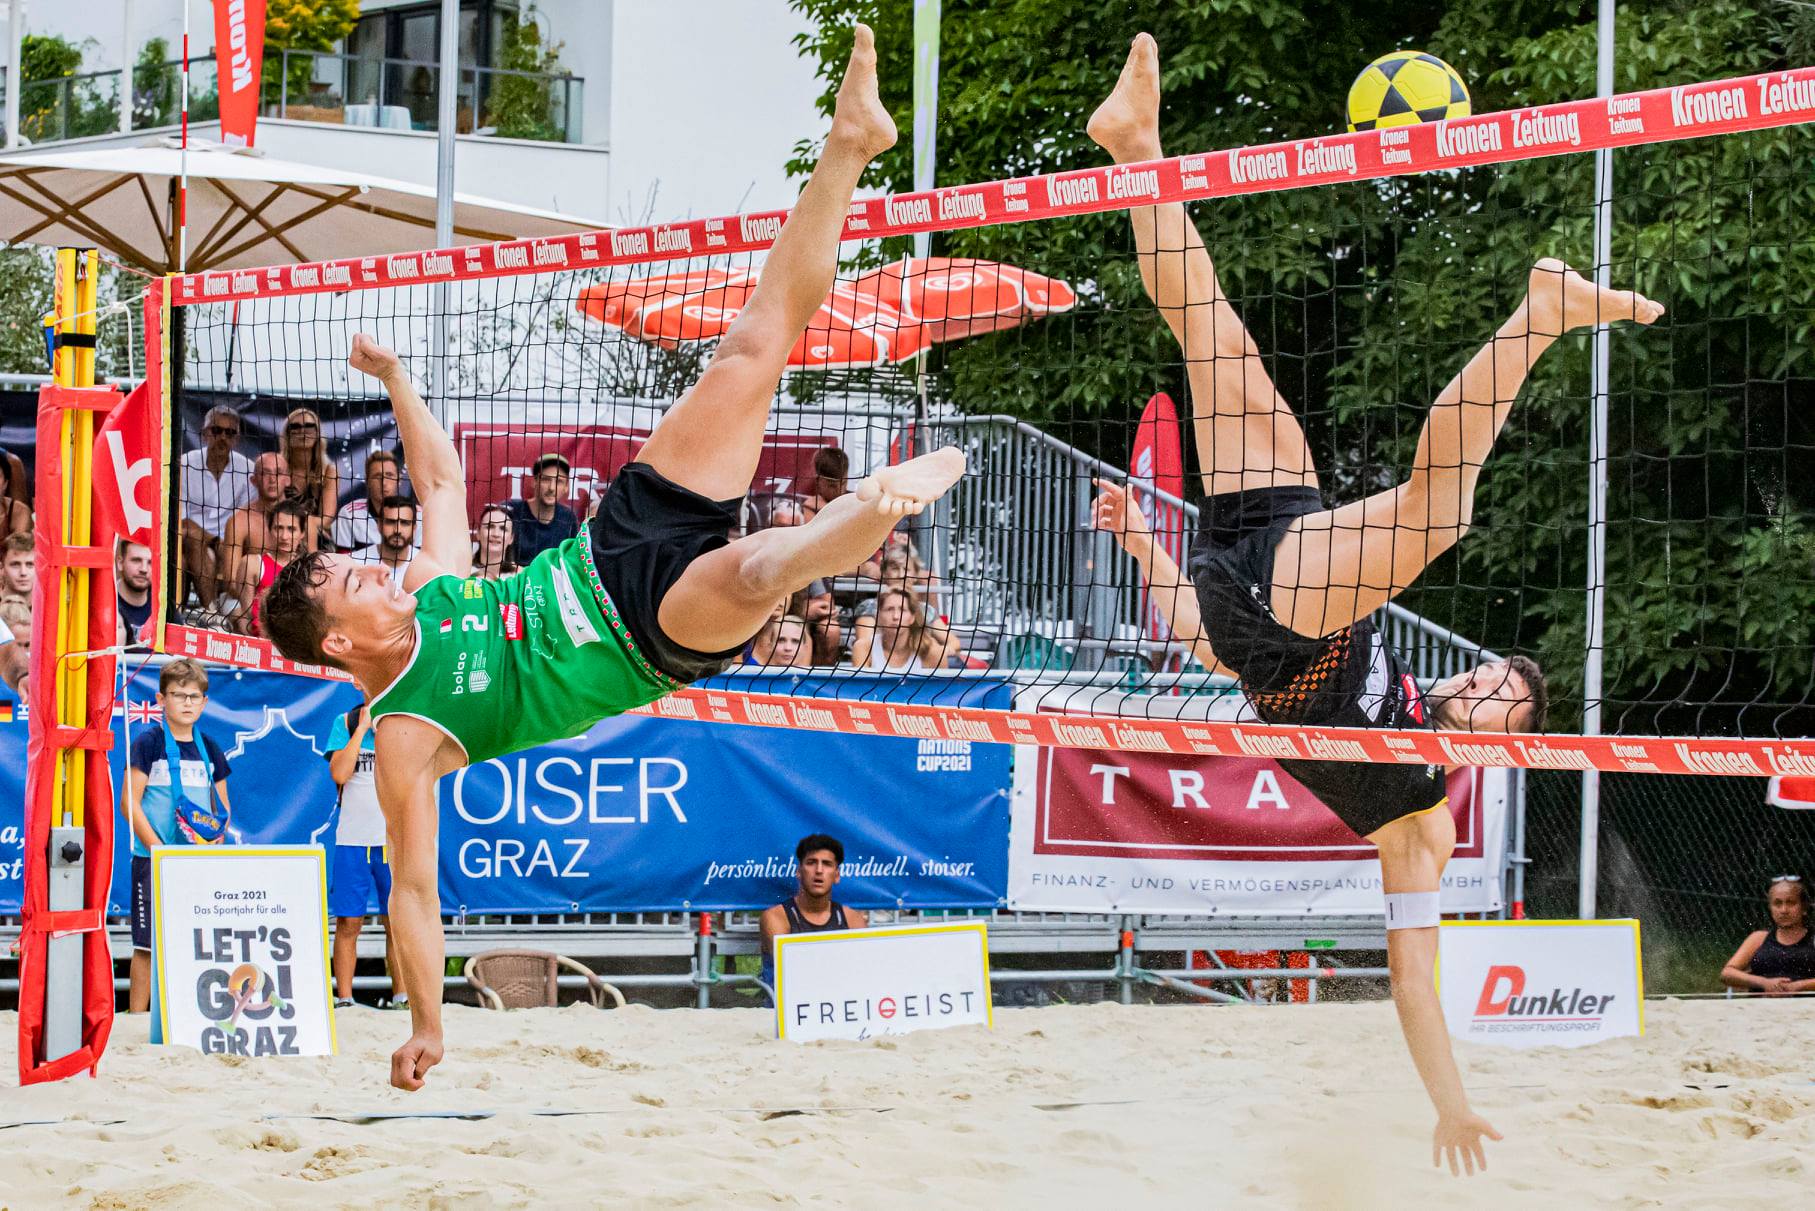 This picture shows two footvolley players doing a "shark attack".